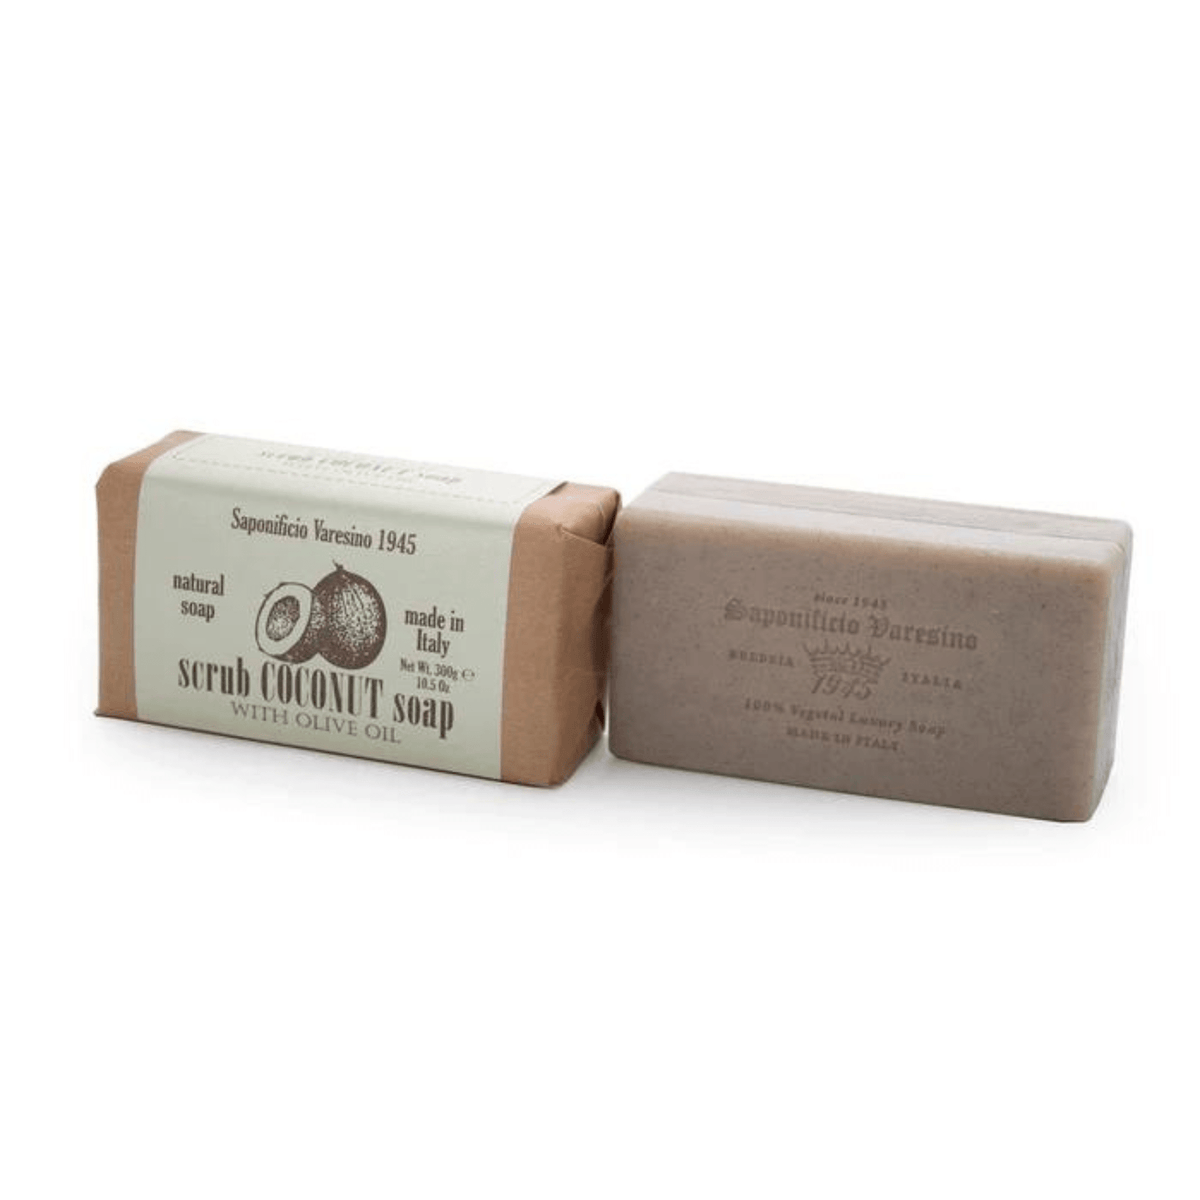 Primary Image of Coconut Scrub with Olive Oil Soap